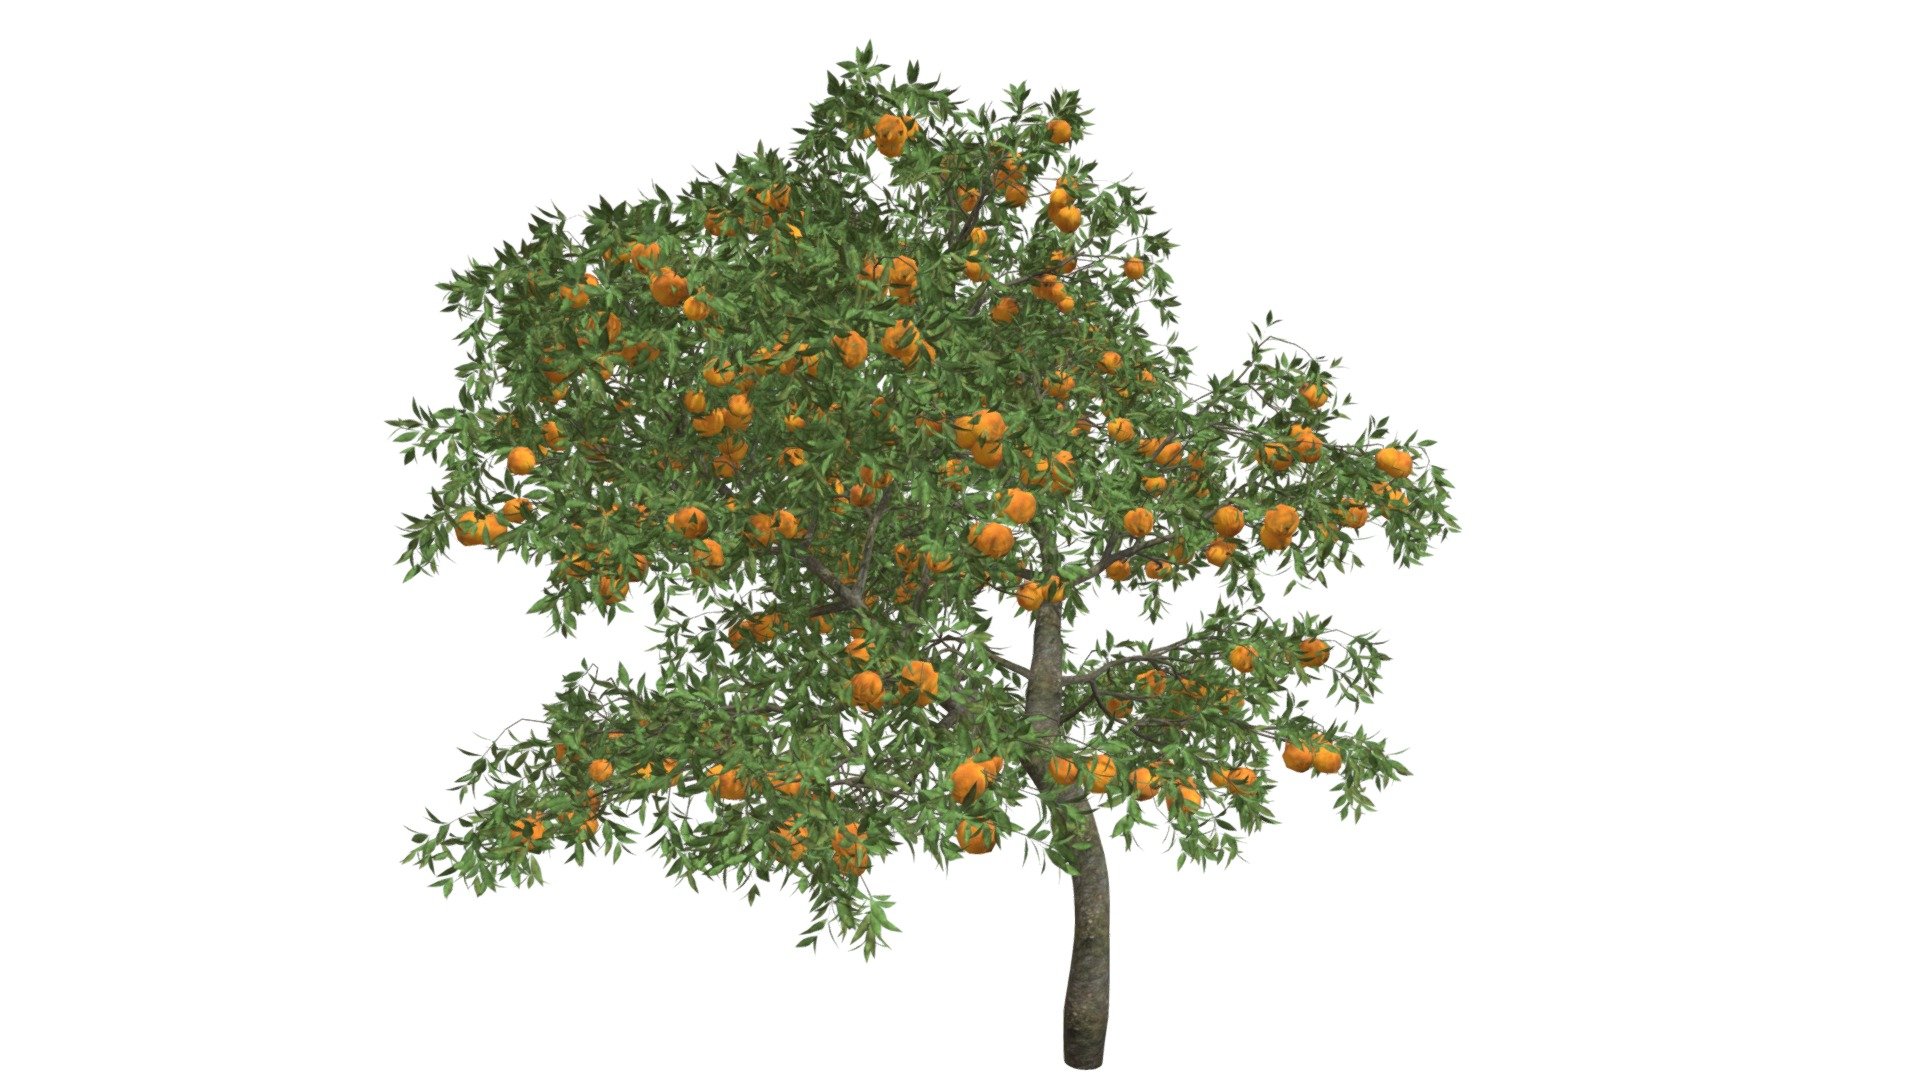 This 3D model of the Orange Tree is a highly detailed and photorealistic option suitable for architectural, landscaping, and video game projects. The model is designed with carefully crafted textures that mimic the natural beauty of a real Orange Tree. Its versatility allows it to bring a touch of realism to any project, whether it's a small architectural rendering or a large-scale landscape design. Additionally, the model is optimized for performance and features efficient UV mapping. This photorealistic 3D model is the perfect solution for architects, landscapers, and game developers who want to enhance the visual experience of their project with a highly detailed, photorealistic Orange Tree 3d model